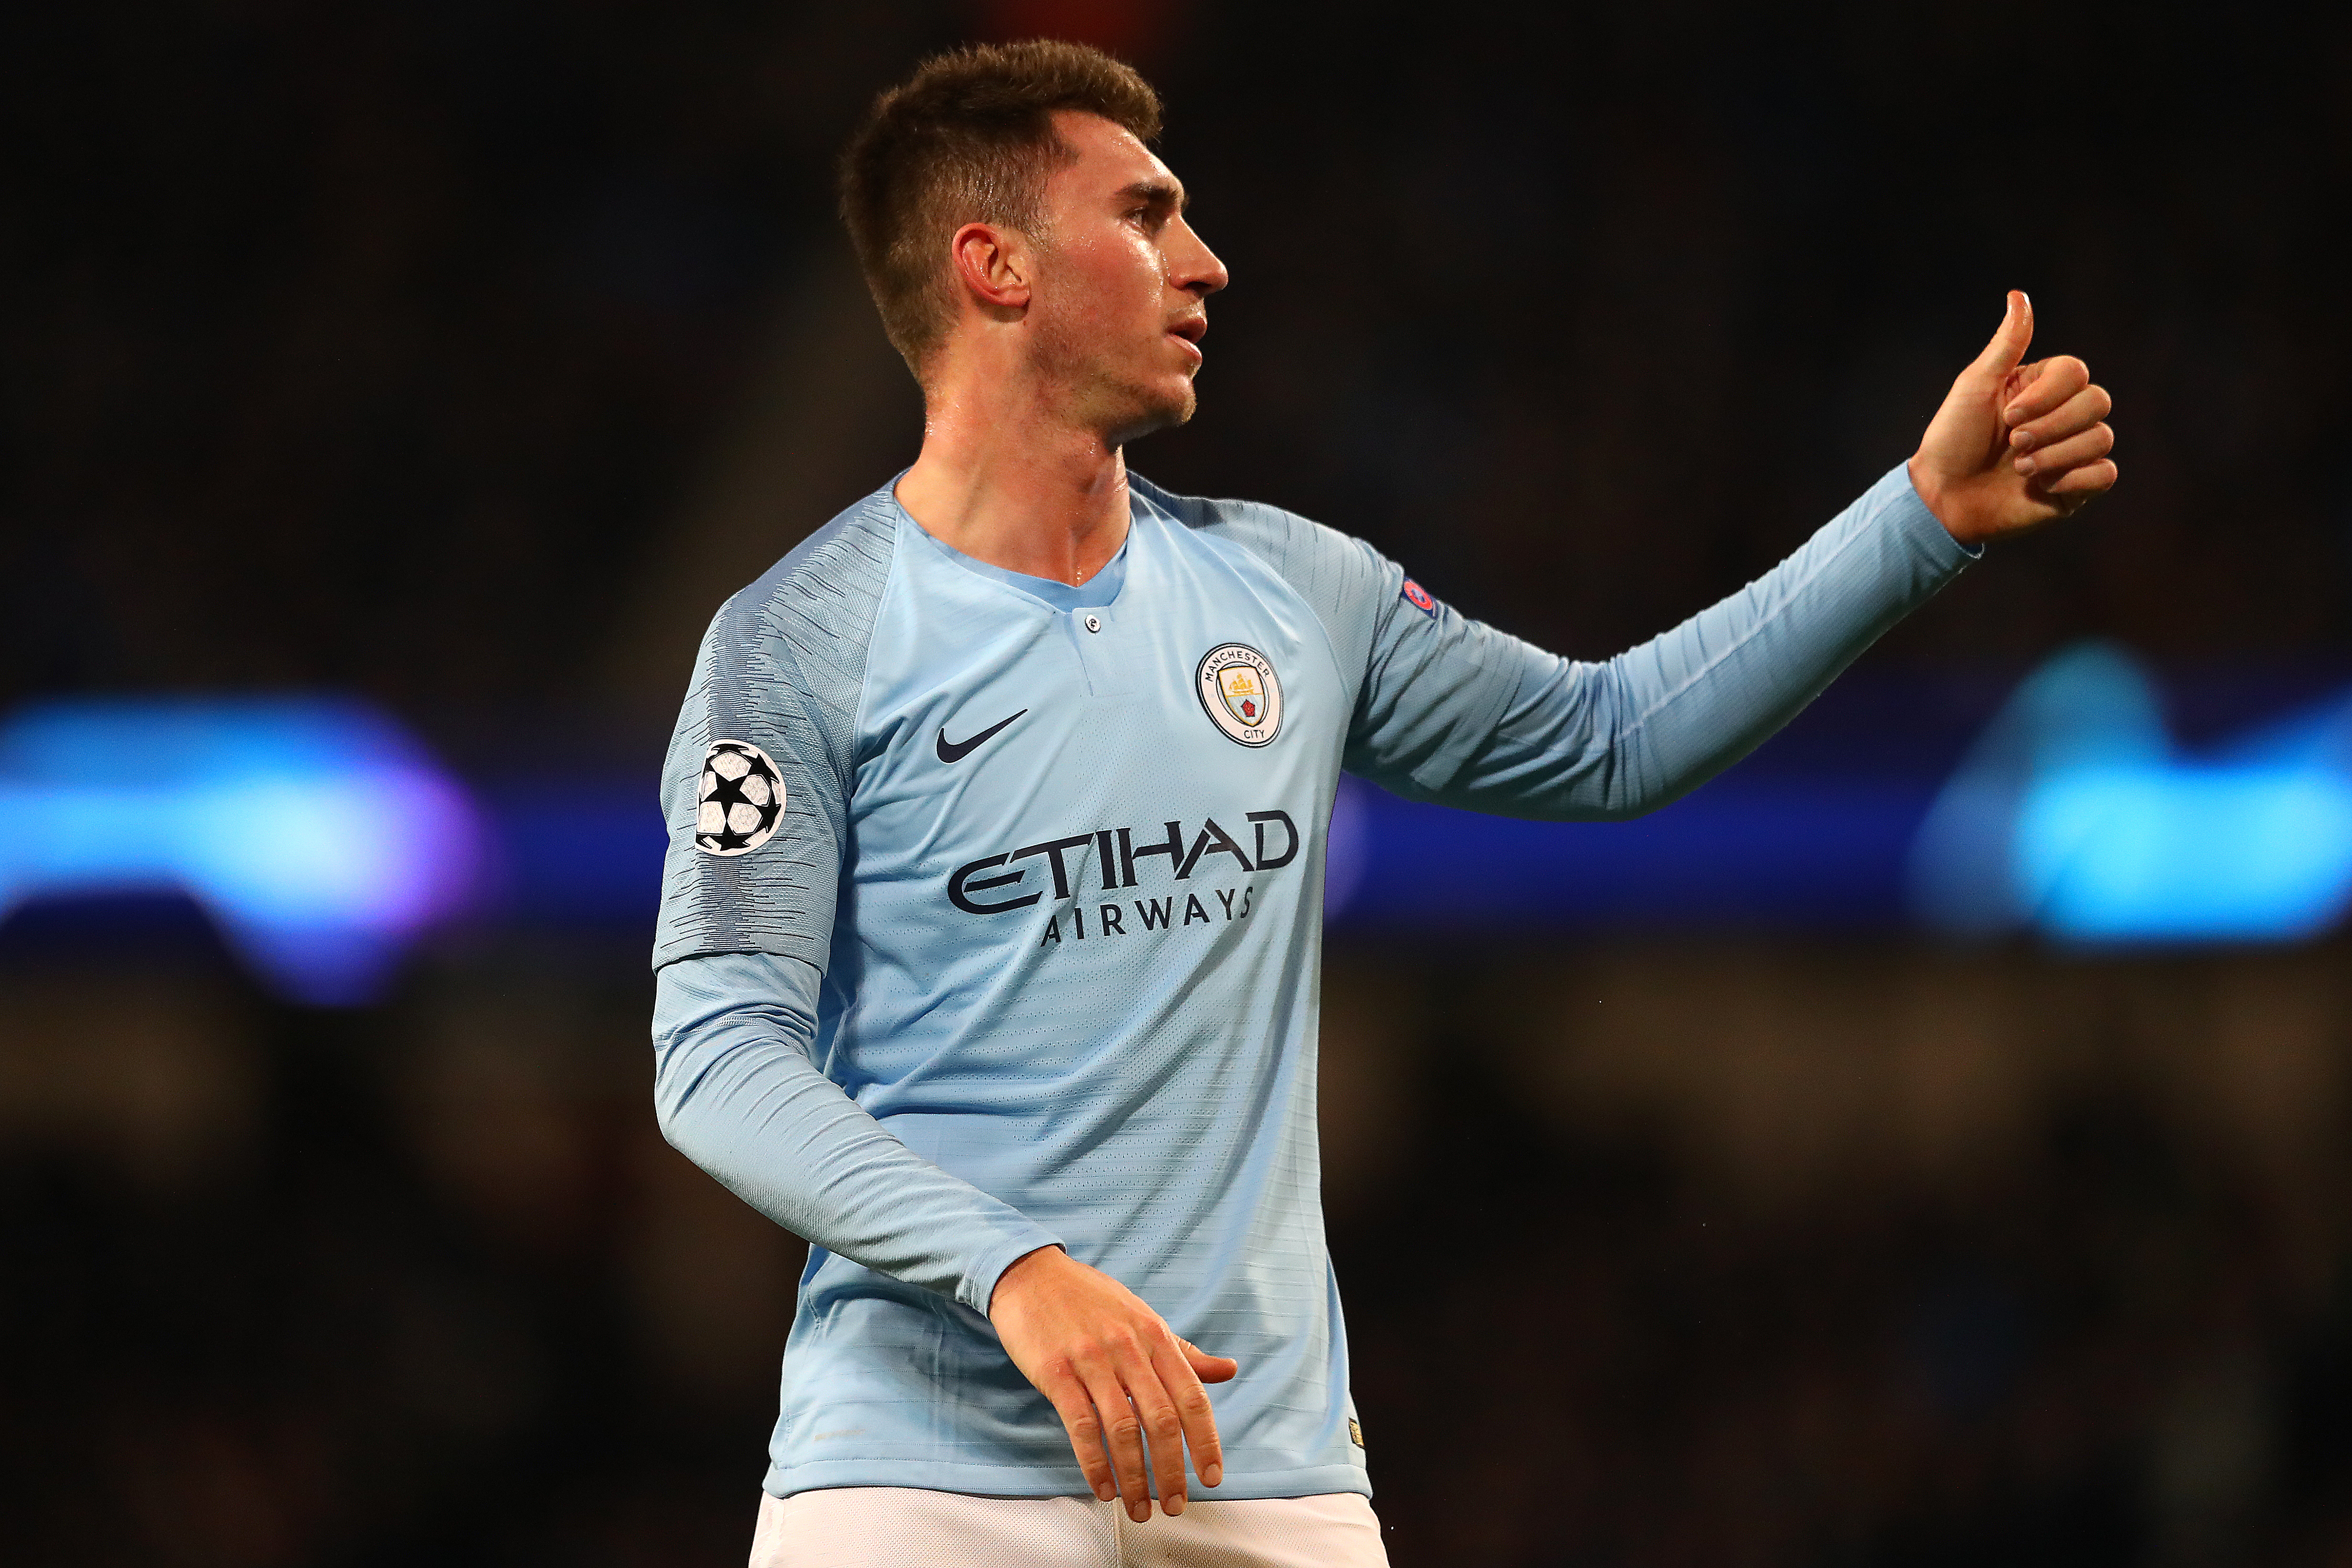 Aymeric Laporte could be rested by Guardiola (Picture Courtesy - AFP/Getty Images)